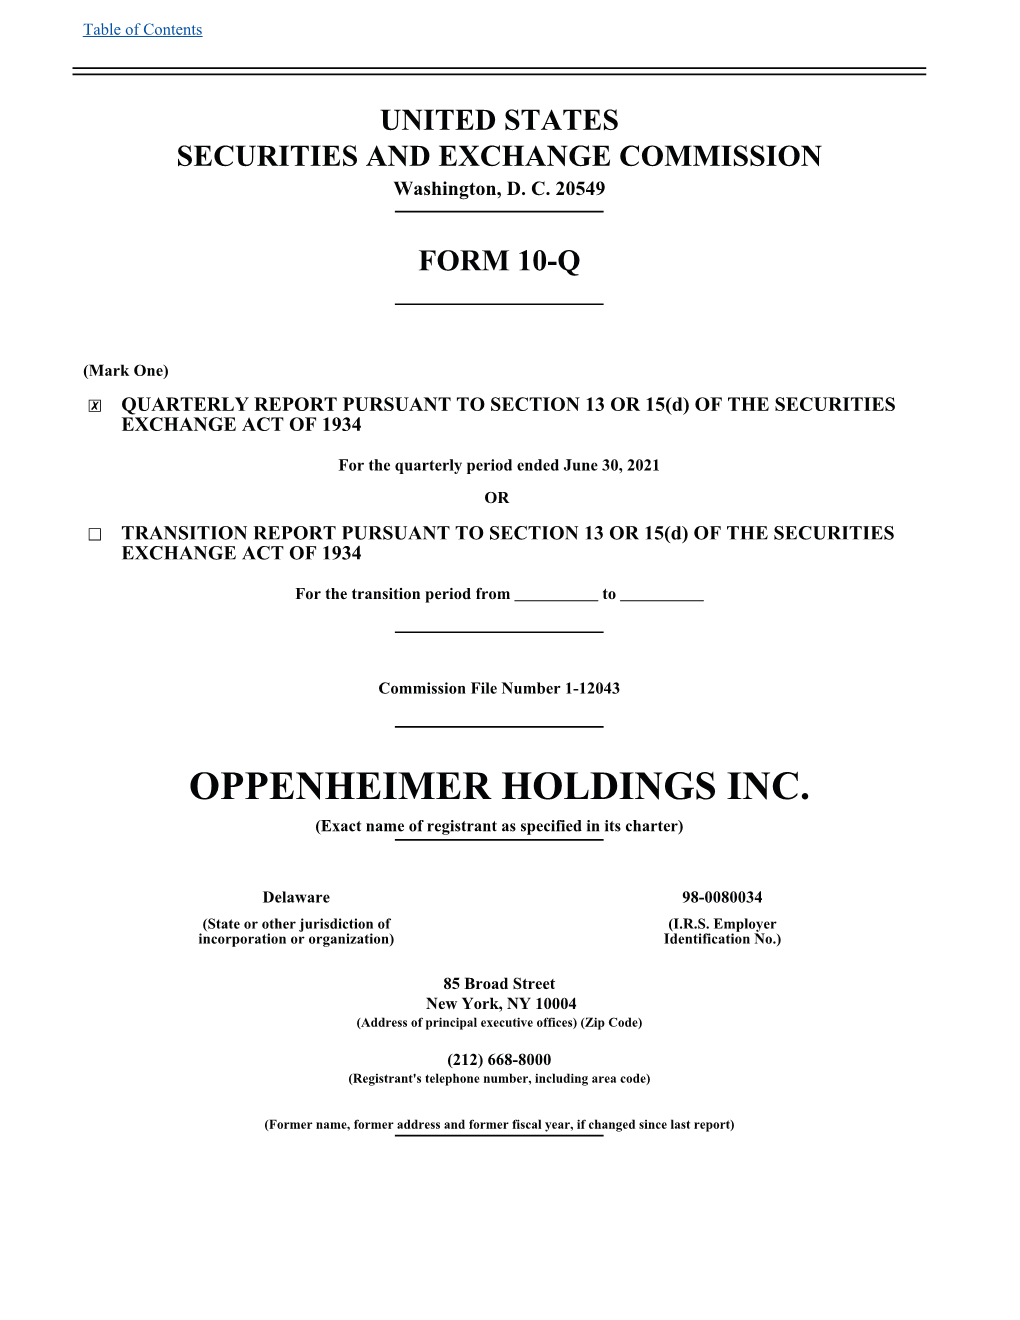 OPPENHEIMER HOLDINGS INC. (Exact Name of Registrant As Specified in Its Charter)